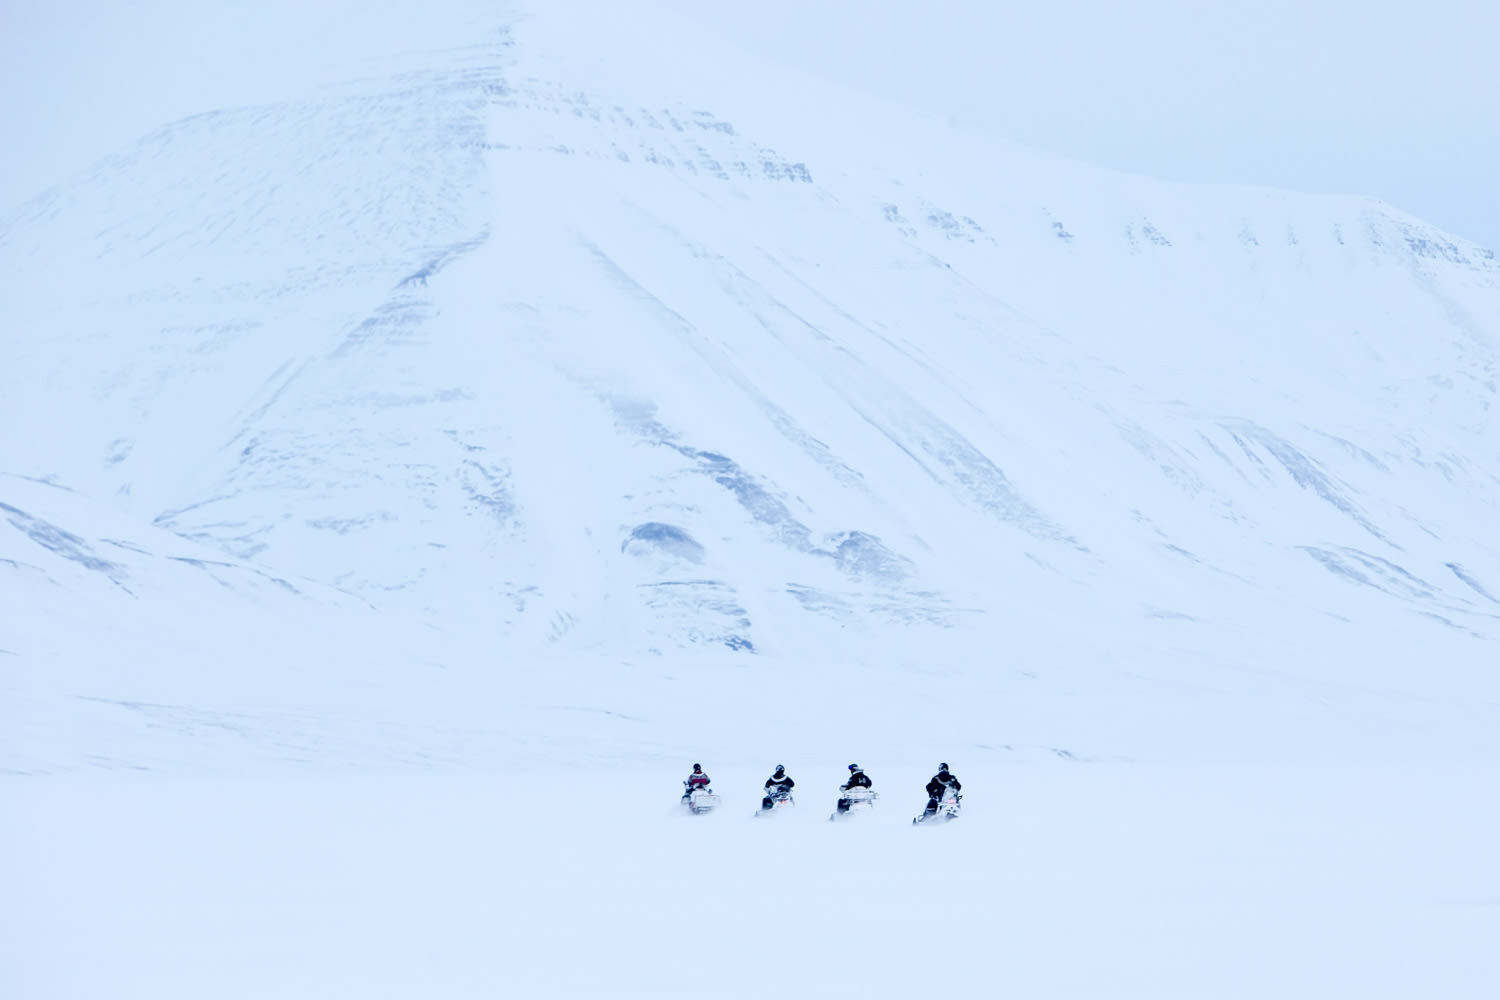 On our way in the wast landscapes of Svalbard.